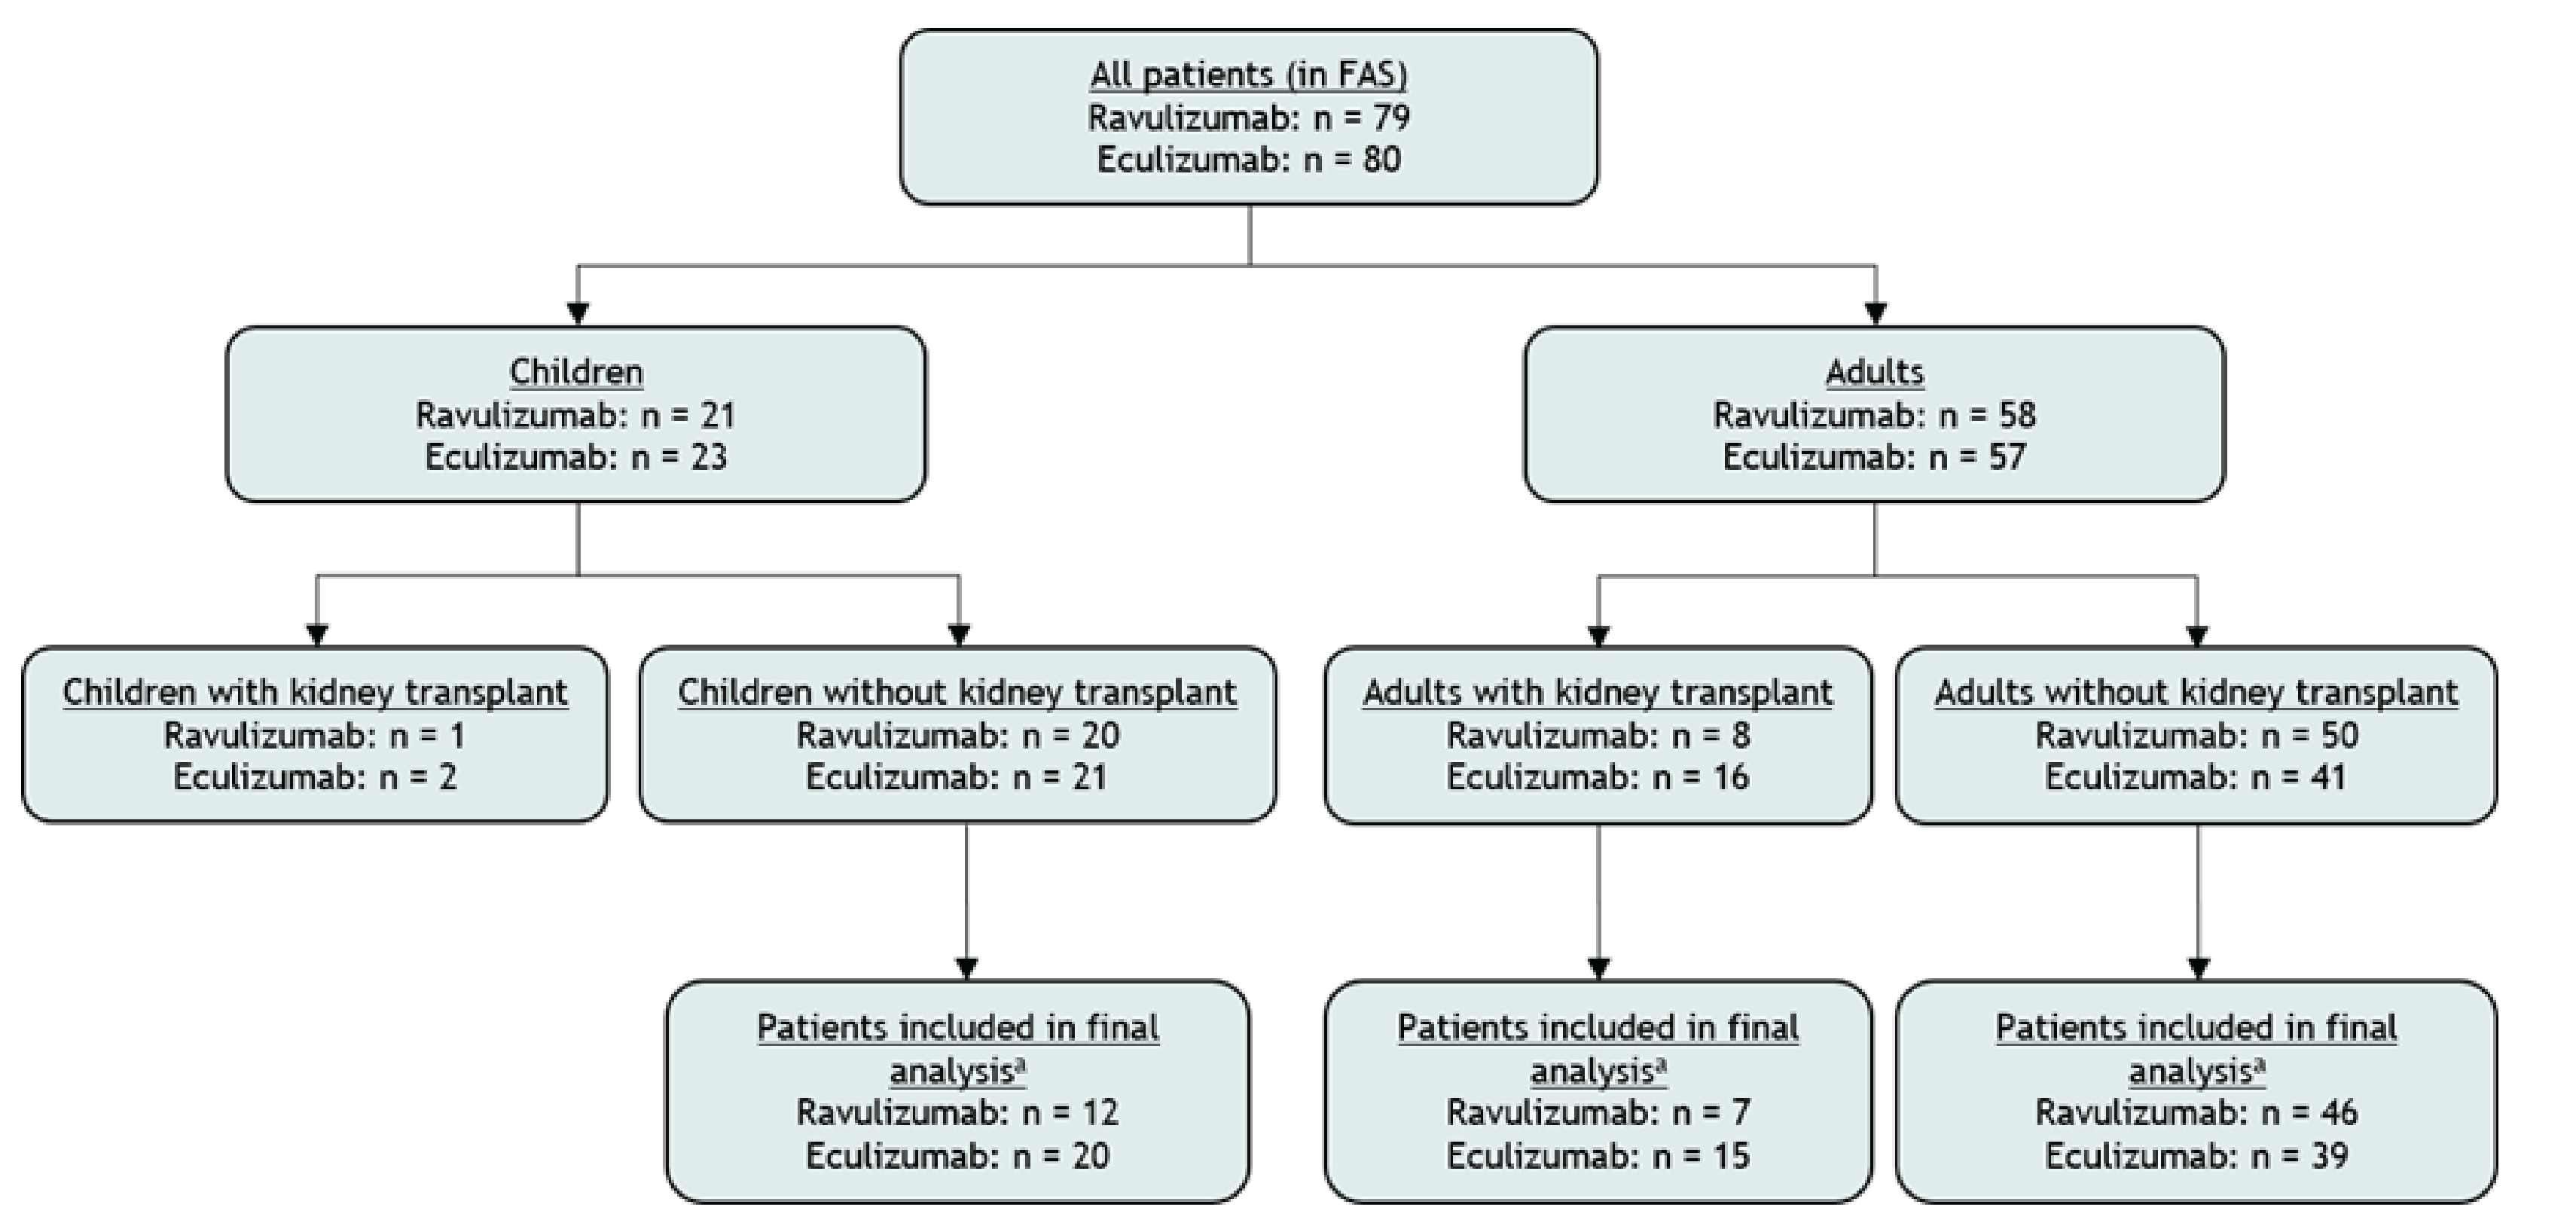 This figure is a flow chart showing attrition after the ITC criteria were applied. From a starting population of 79 adult and pediatric patients on ravulizumab and 80 adult and pediatric patients on eculizumab, 12 pediatric and 53 adult patients on ravulizumab and 20 pediatric and 54 adult patients on eculizumab were included in the final analysis.